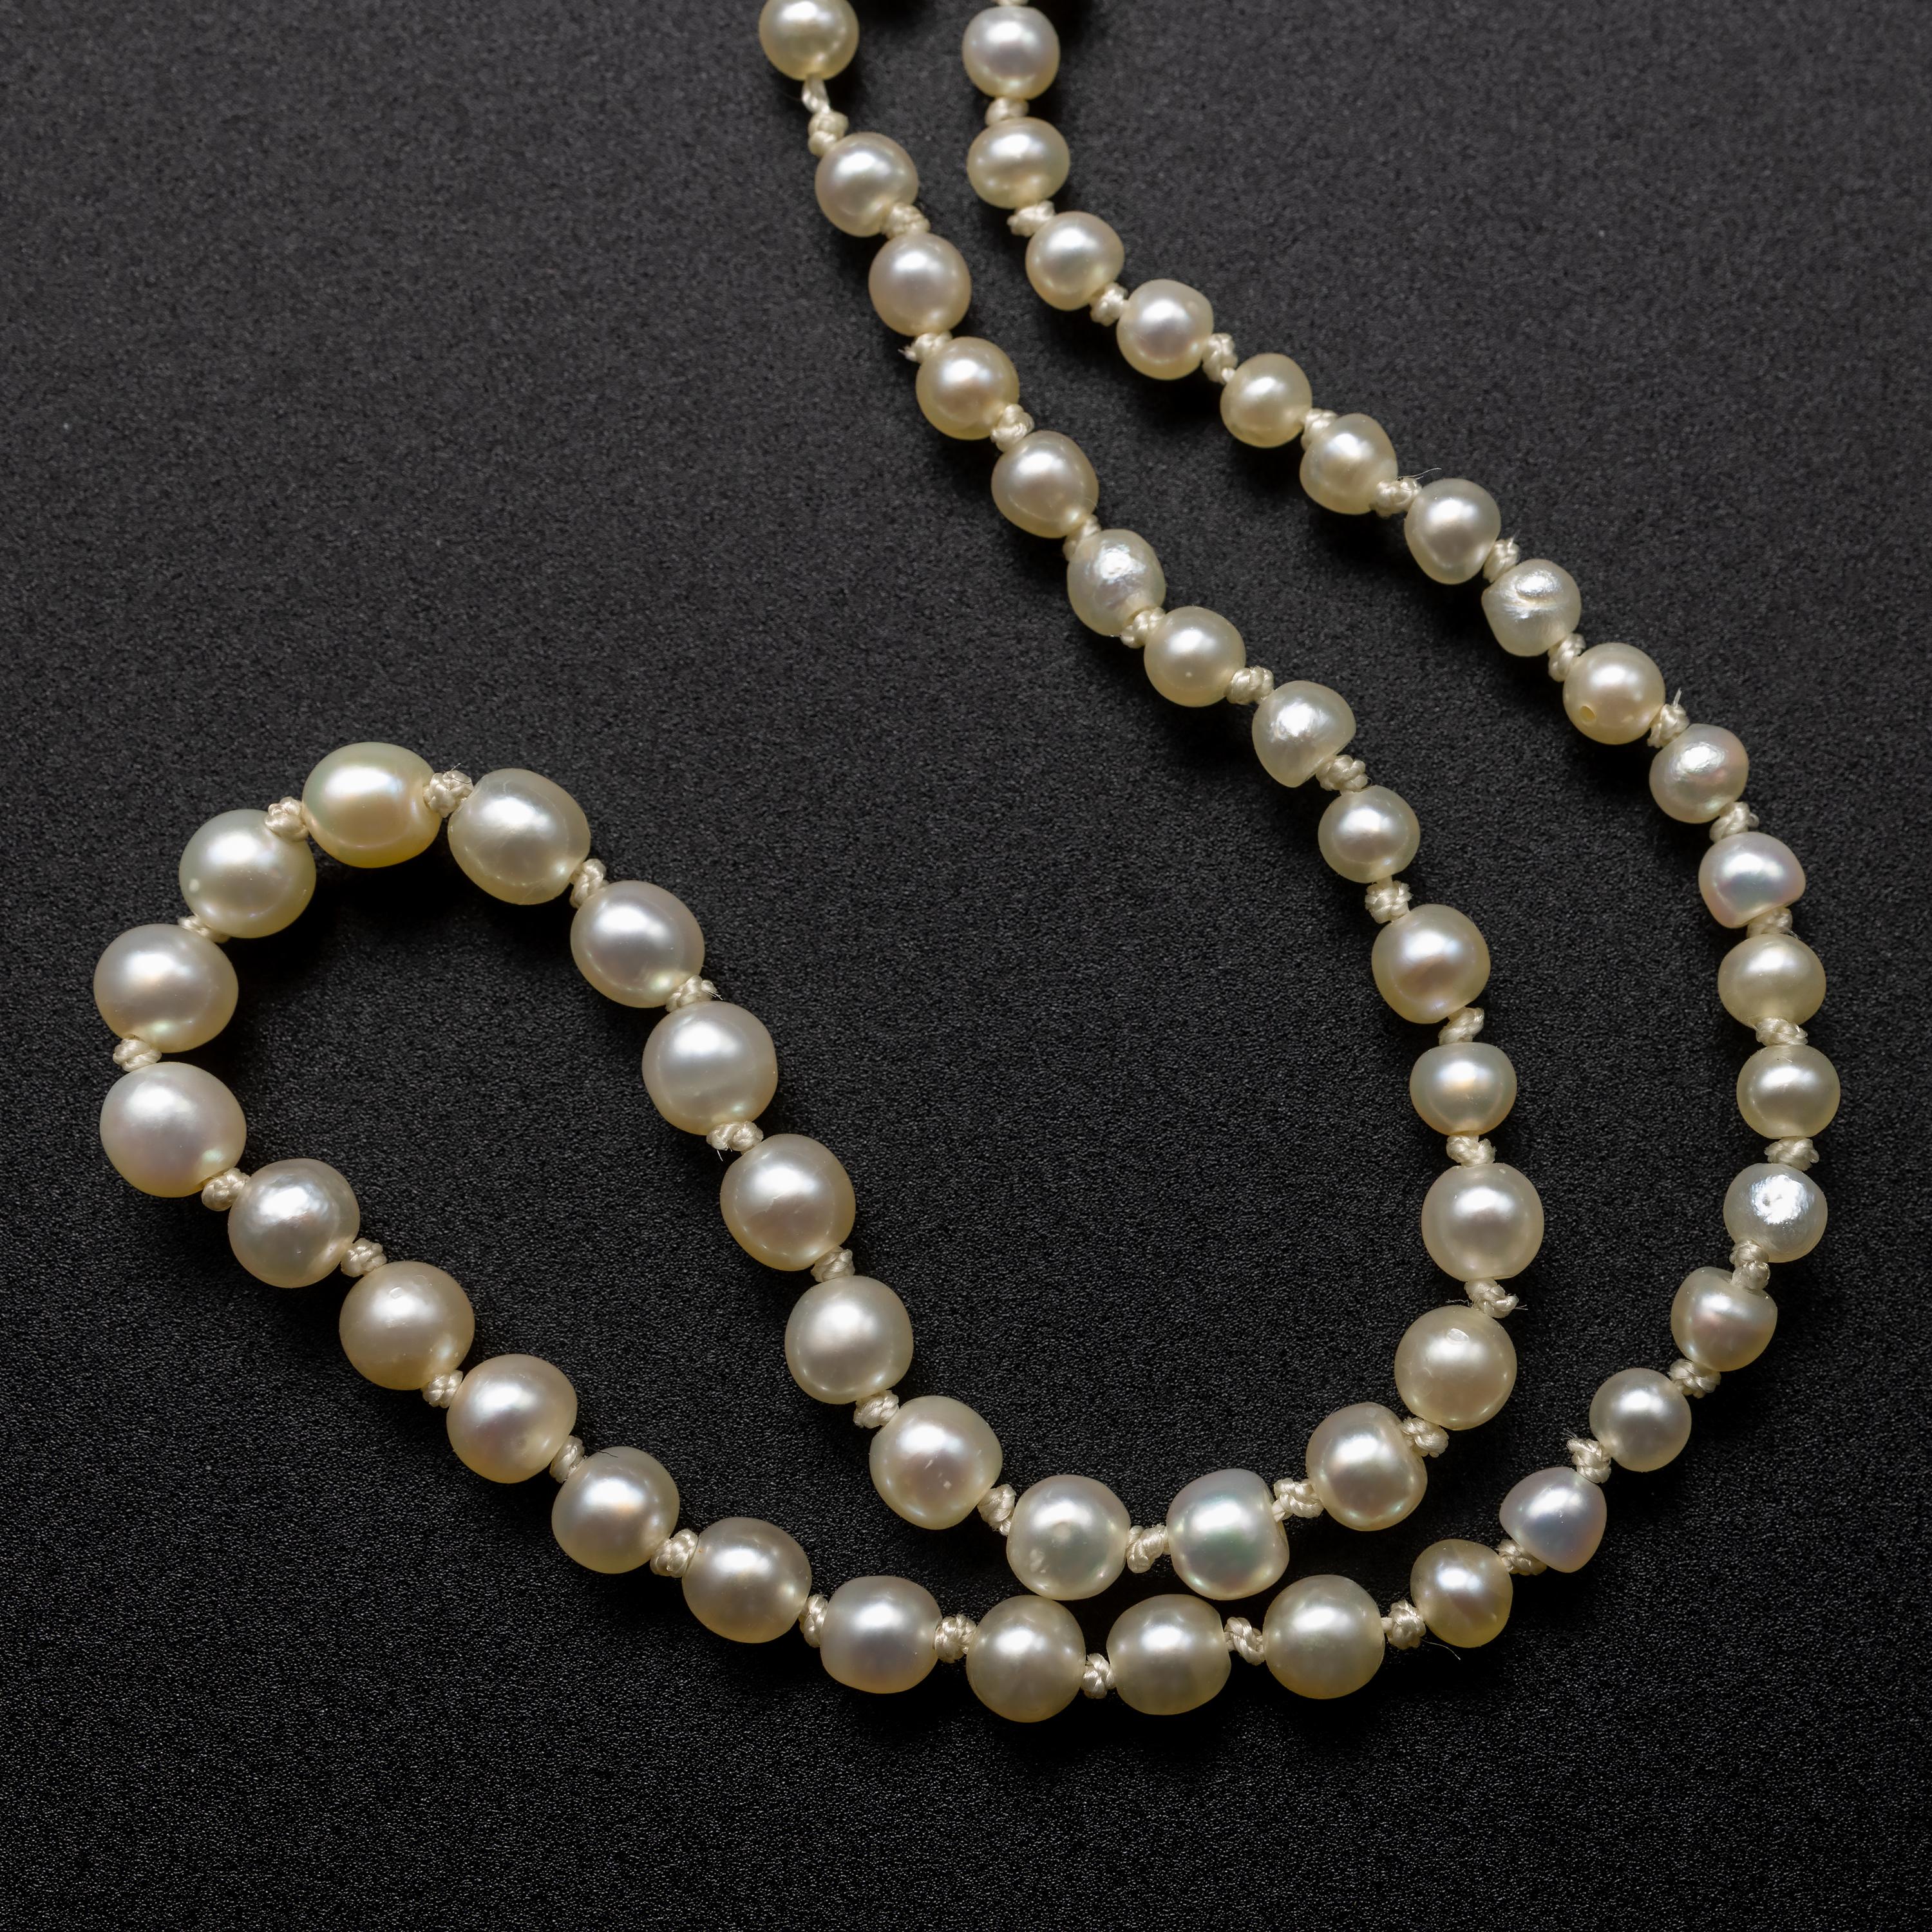 uncultured pearl necklace